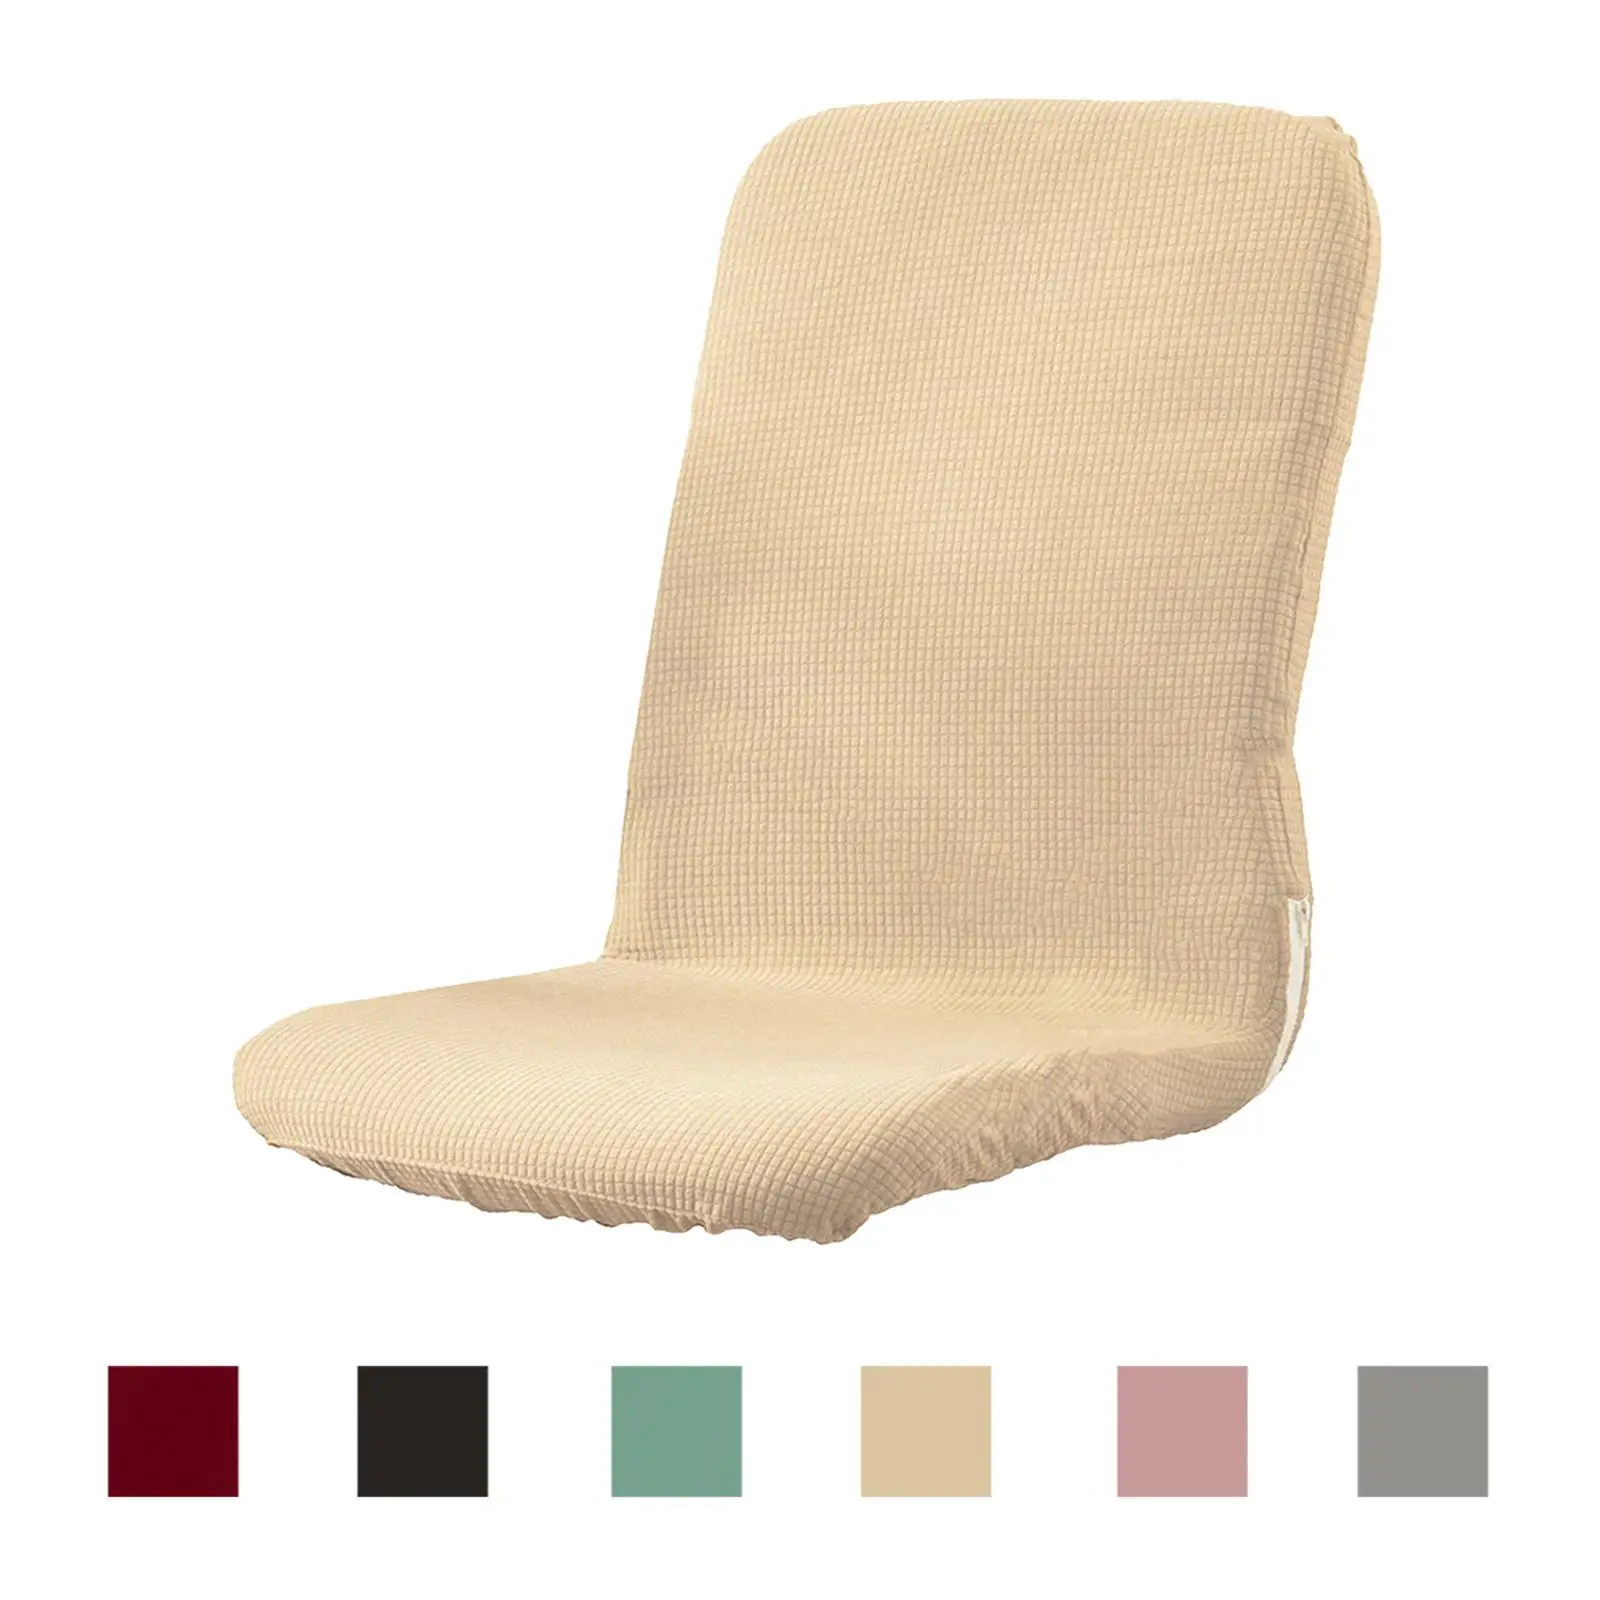 Office Chair Covers Armchair Slipcover Boss Chair Slipcovers for Home Office Chairs Decor